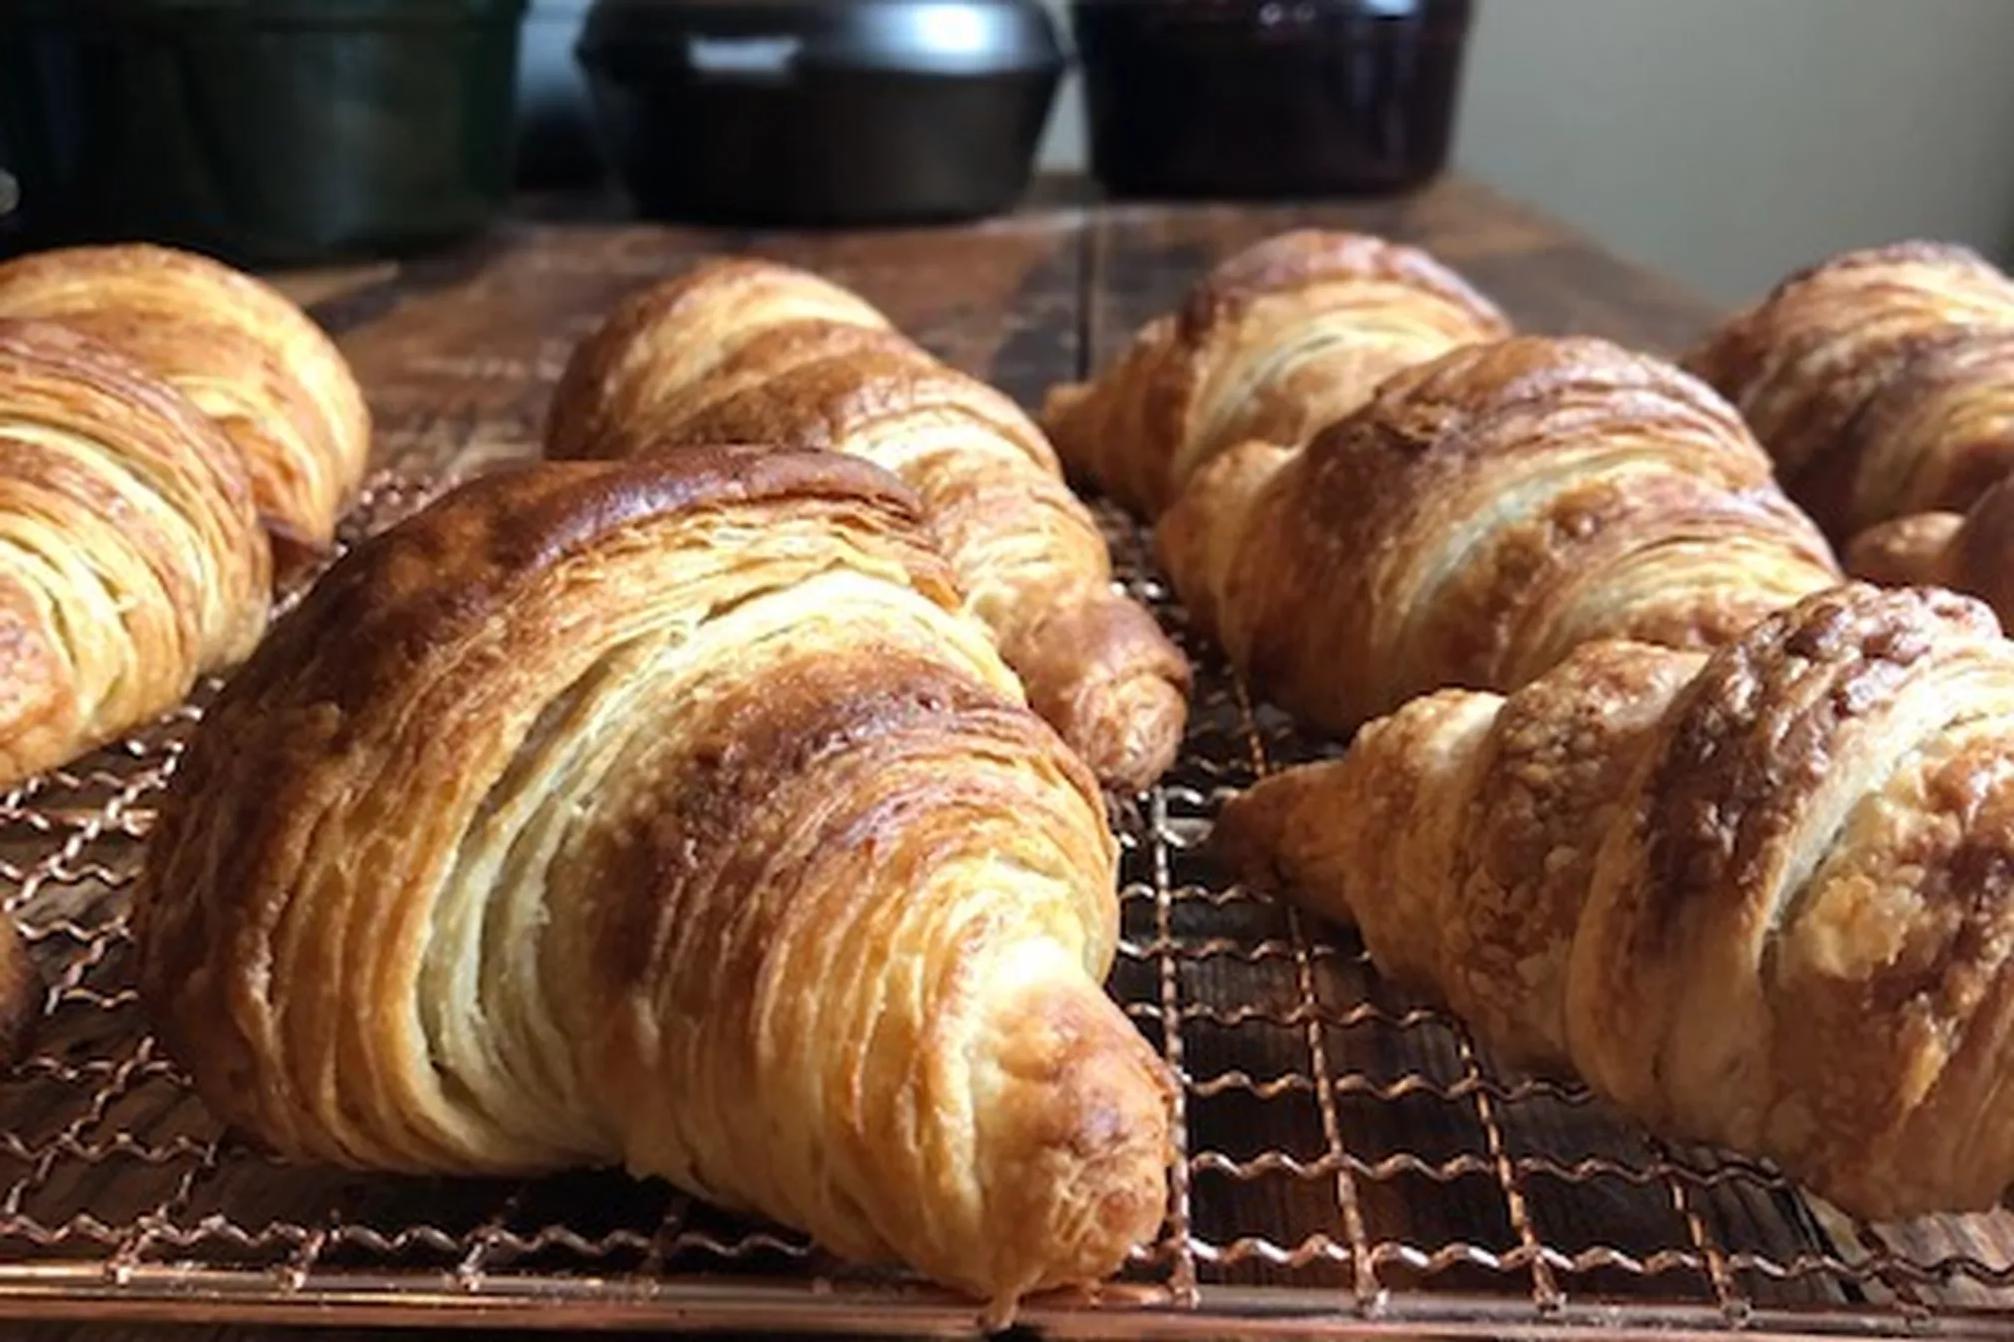  One bite of these vegan croissants and you'll be transported to a Parisian bakery.